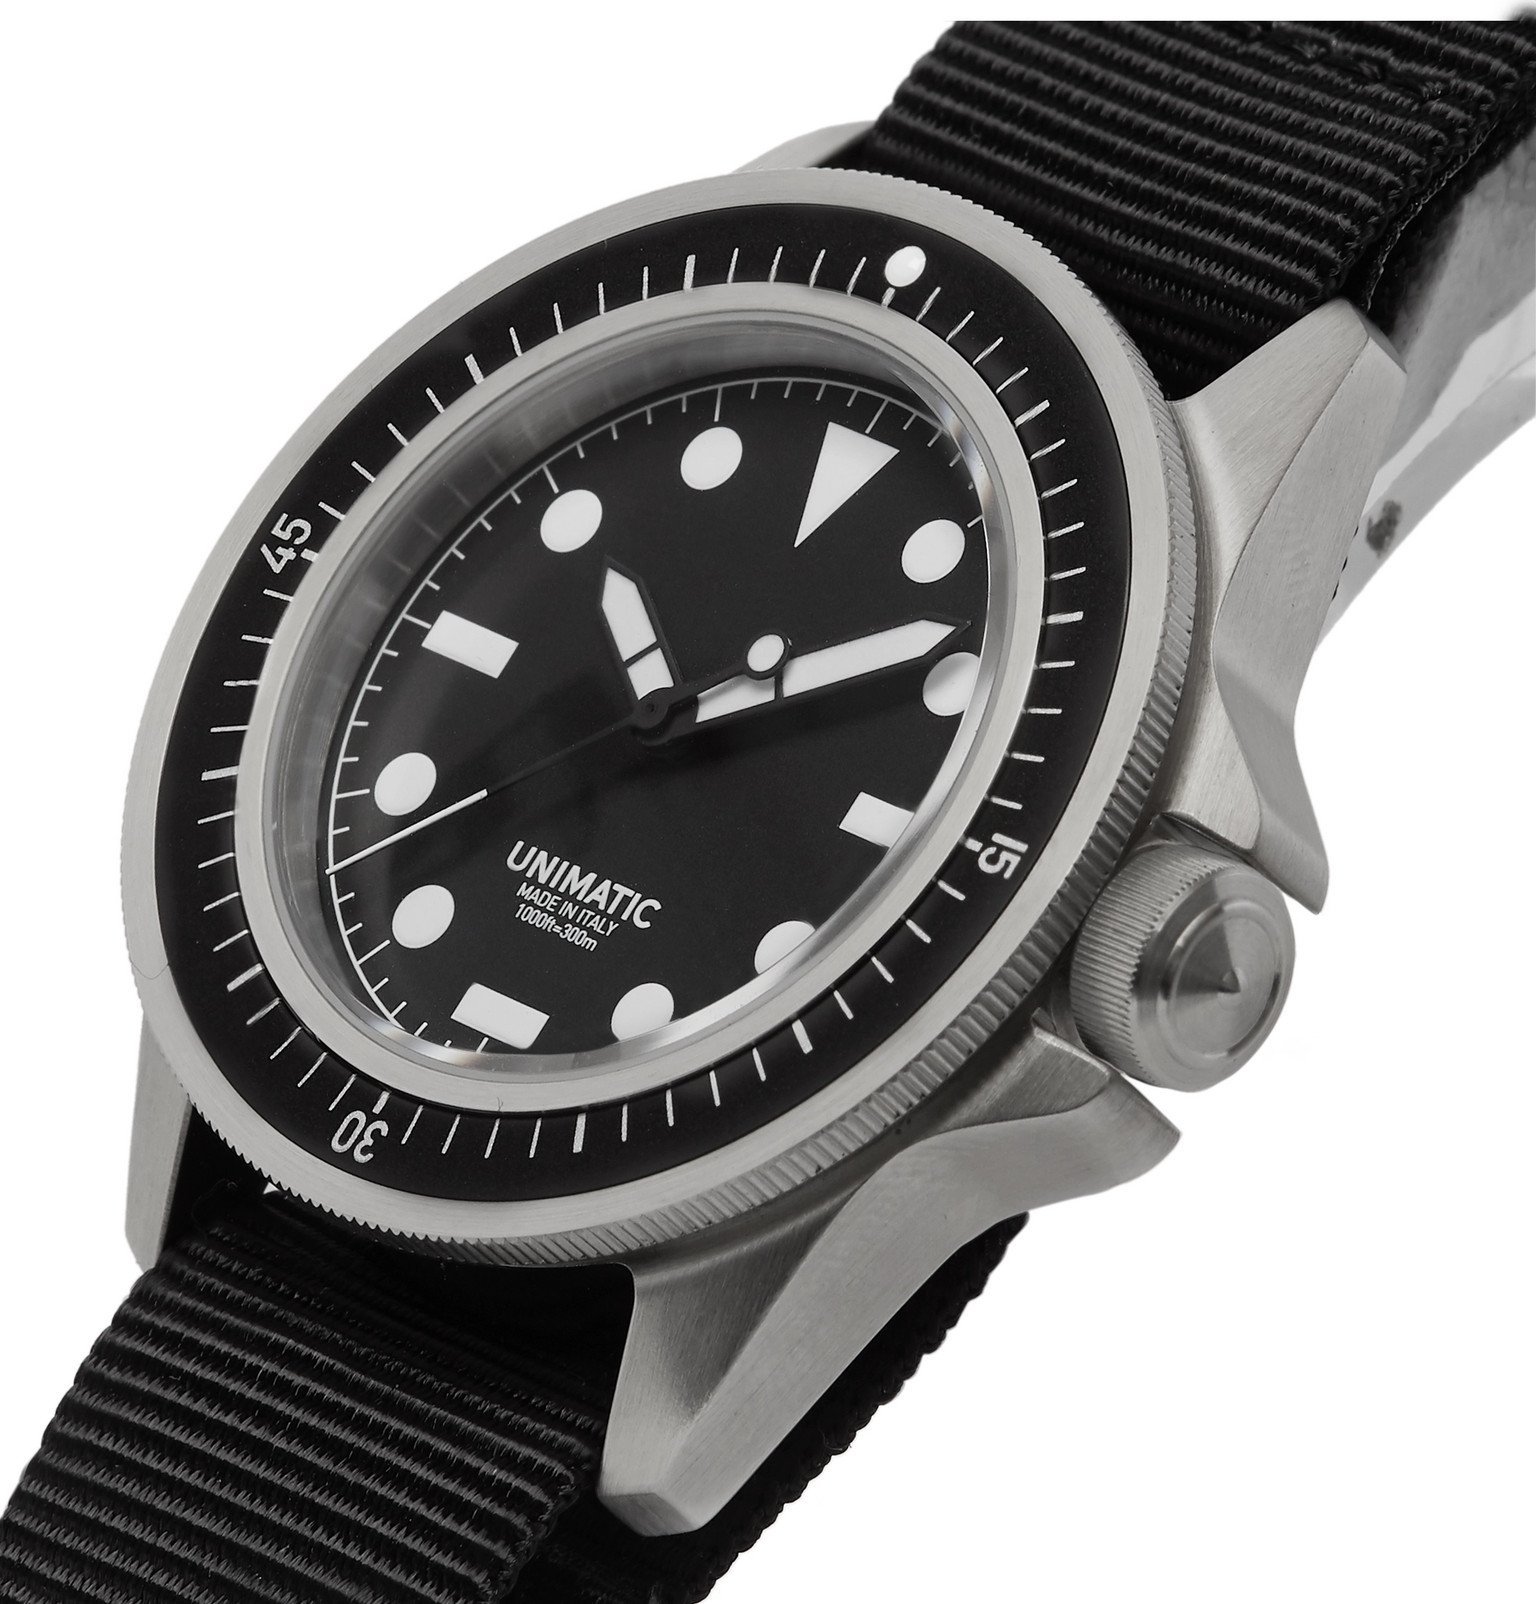 Unimatic - U1-F Automatic Stainless Steel and NATO Webbing Watch ...